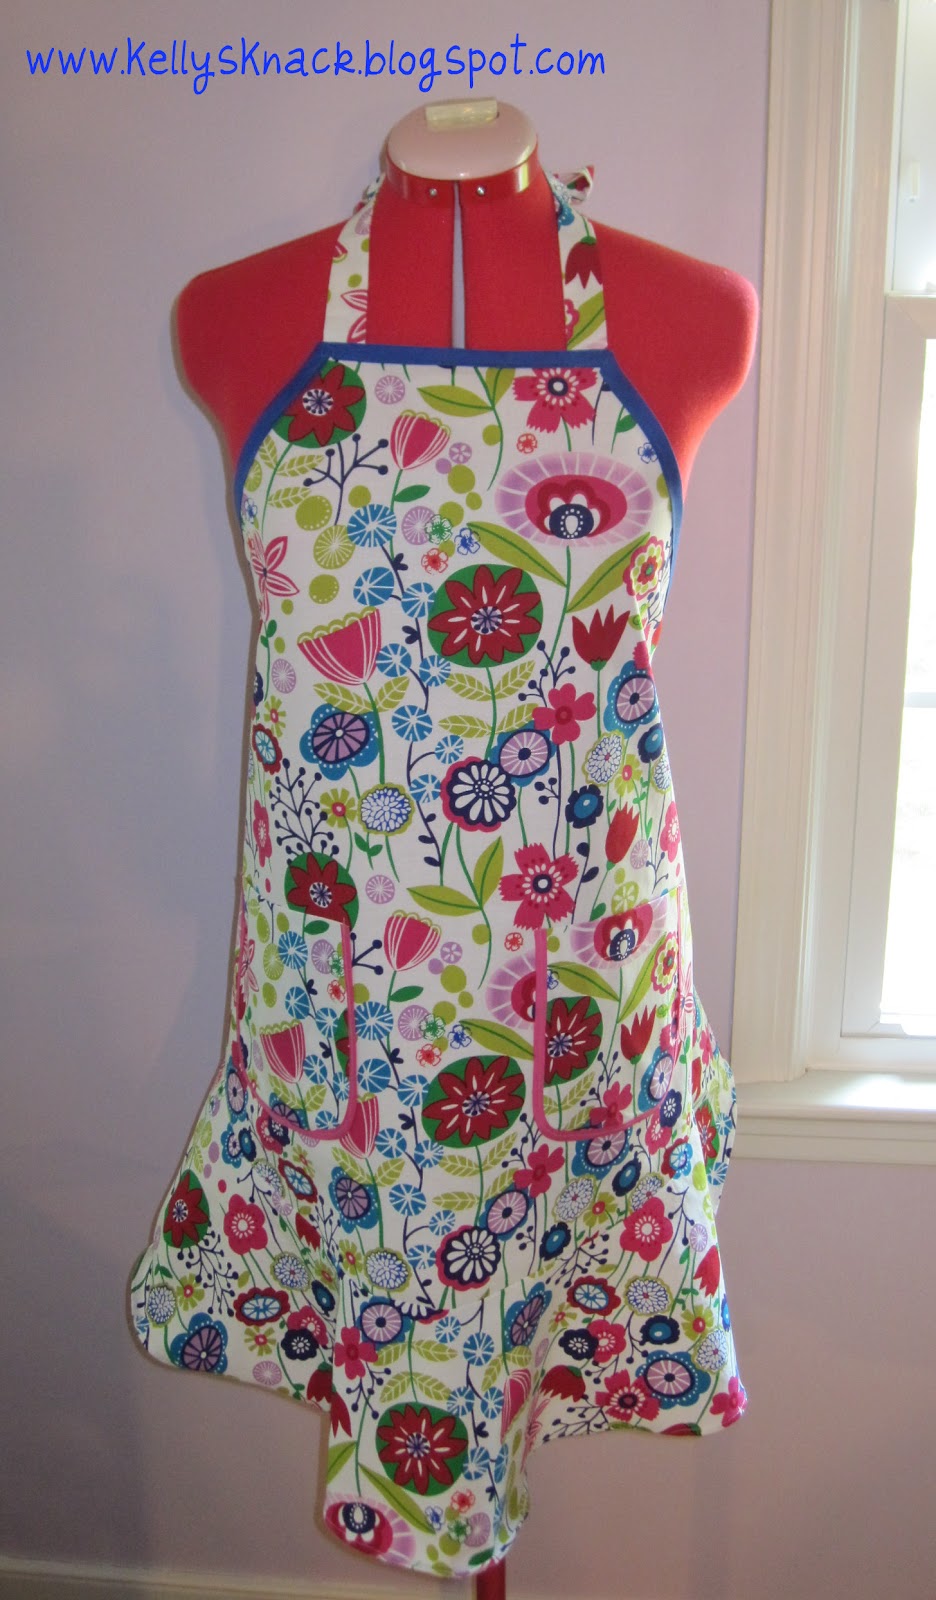 Kelly's Knack: an Apron for Gretchen